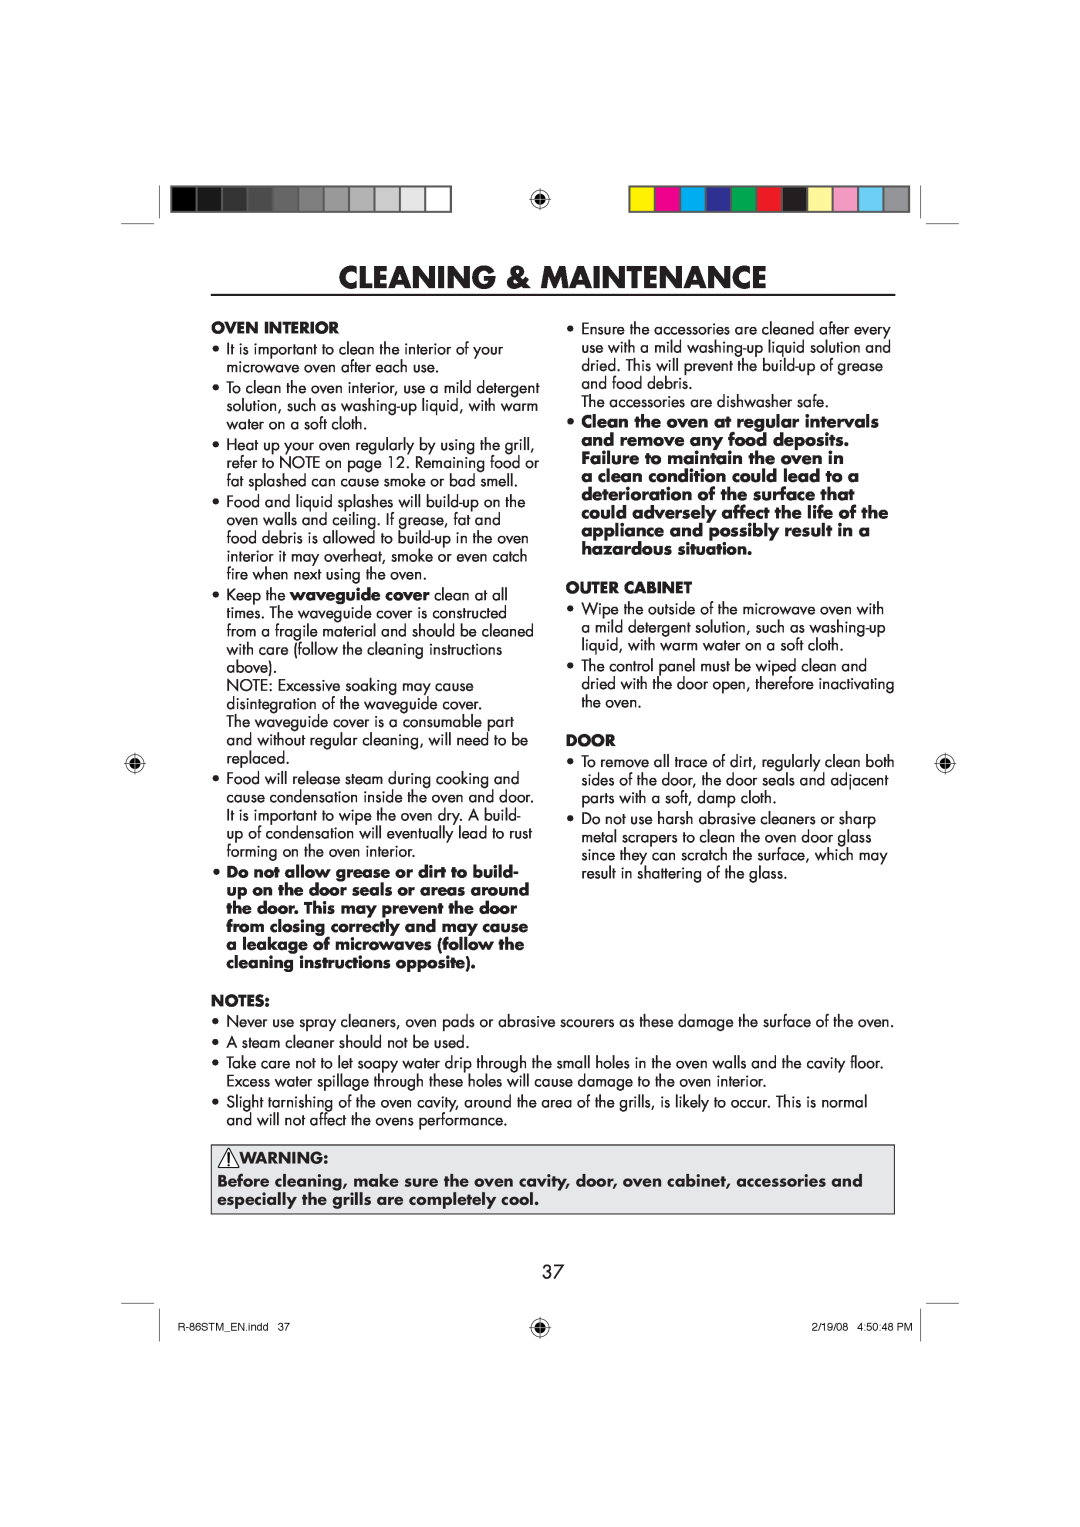 Sharp R-86STM manual Cleaning & Maintenance, Oven Interior, Outer Cabinet, Door 